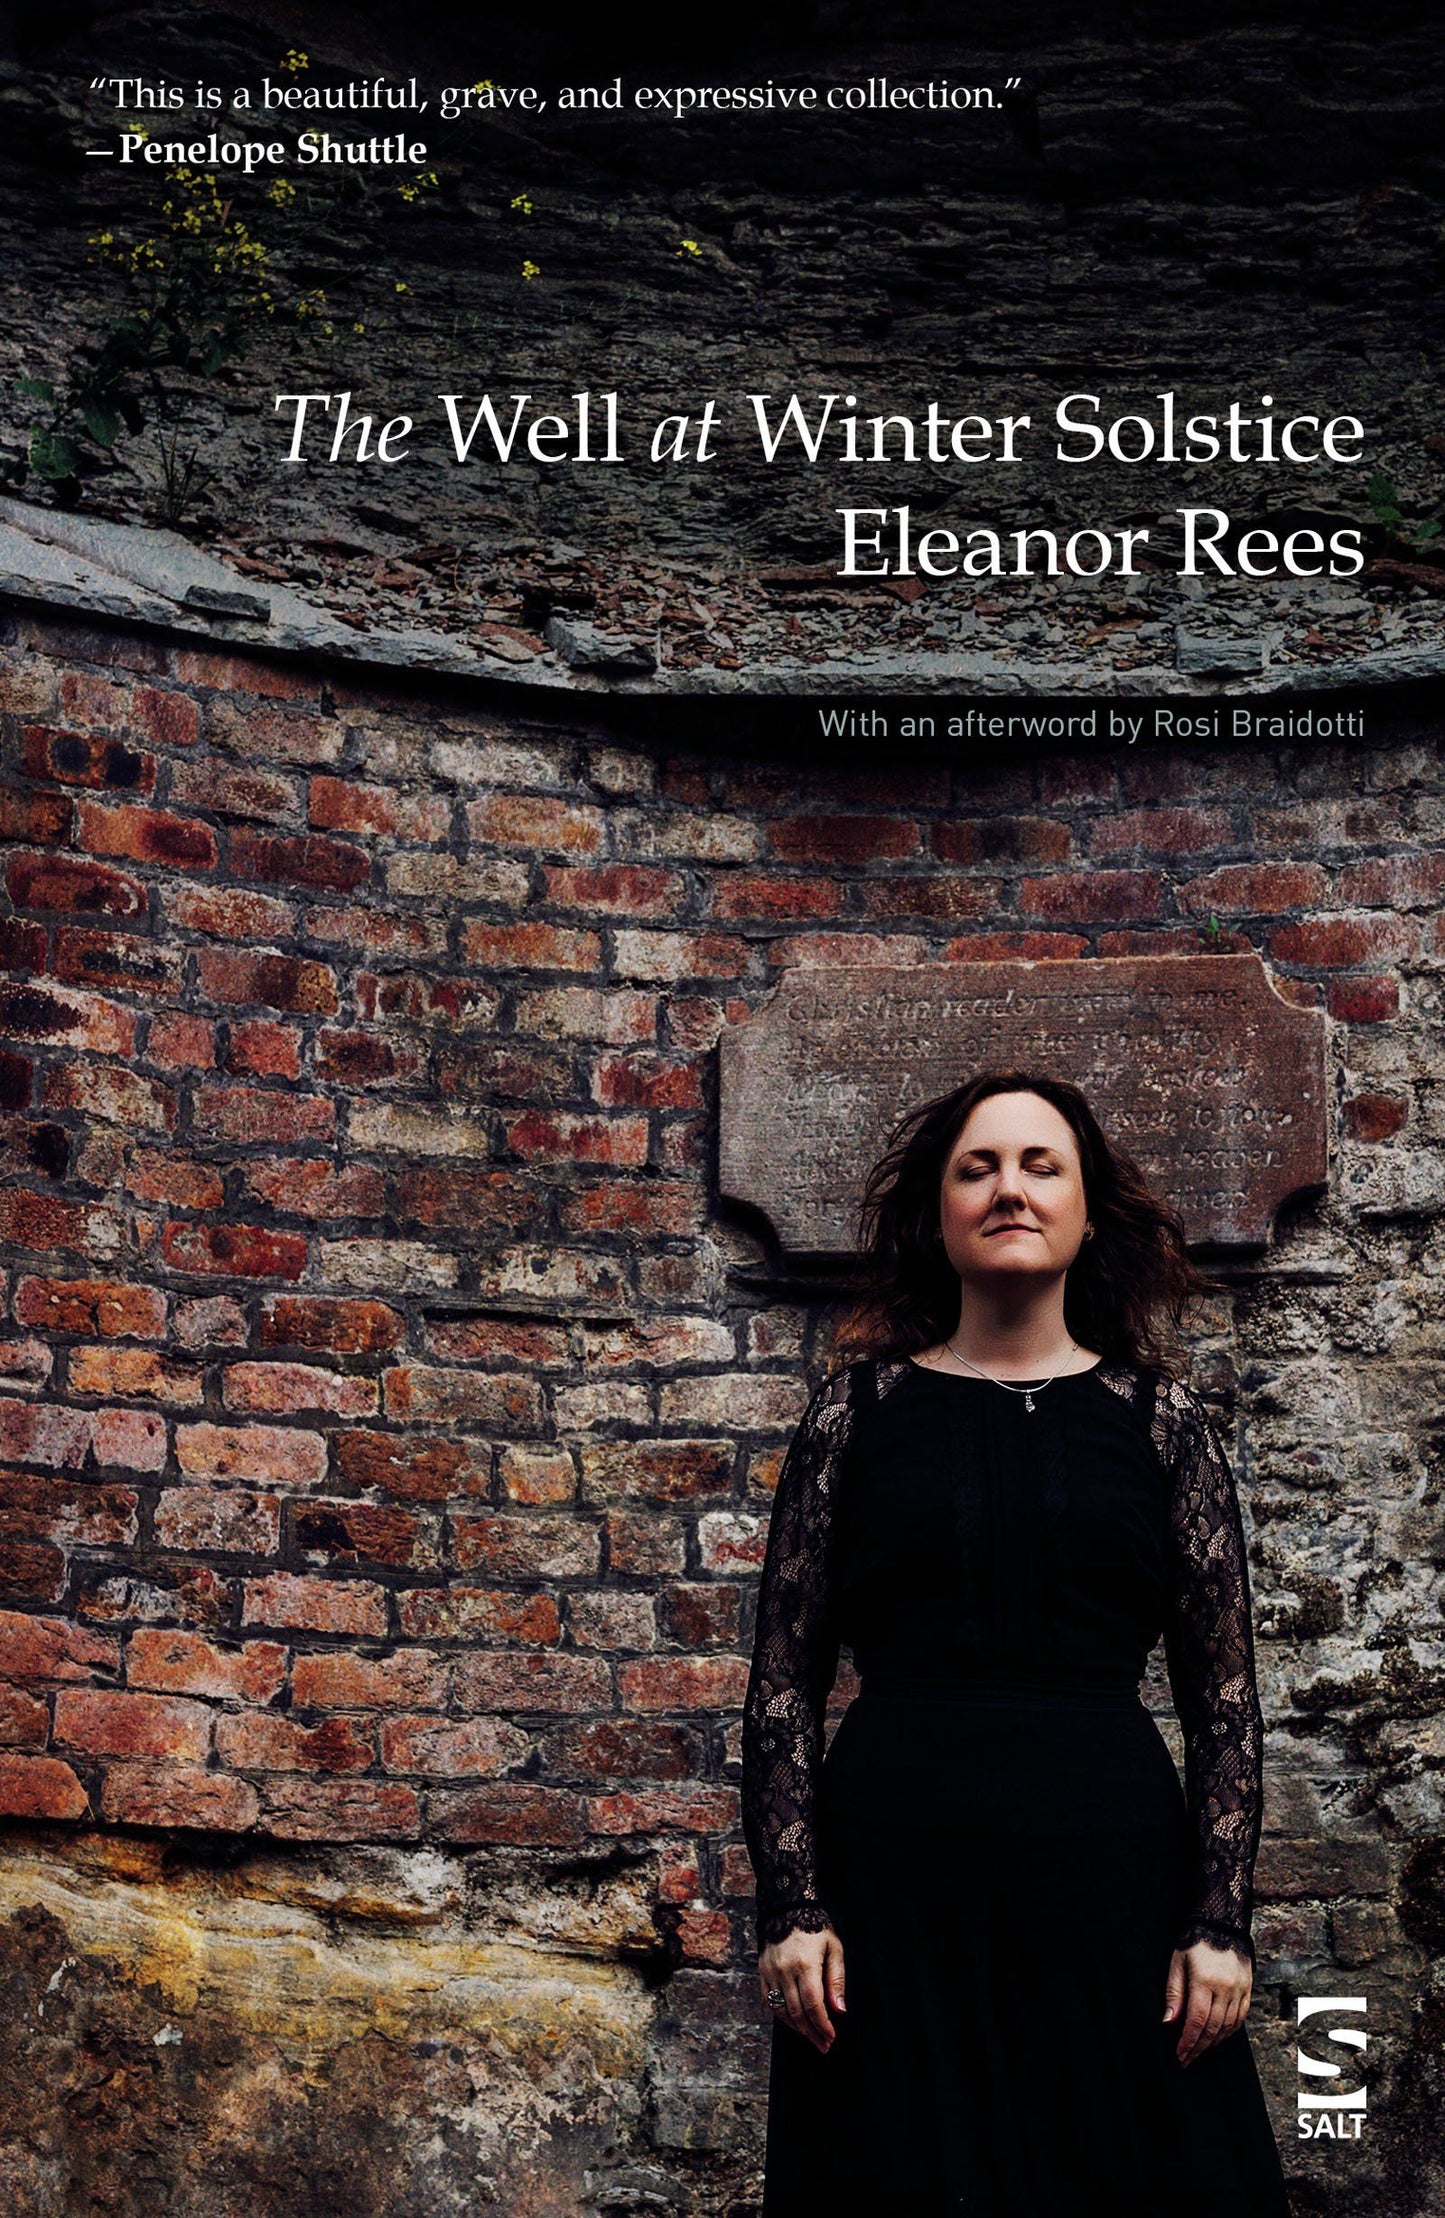 The Well at Winter Solstice - Salt